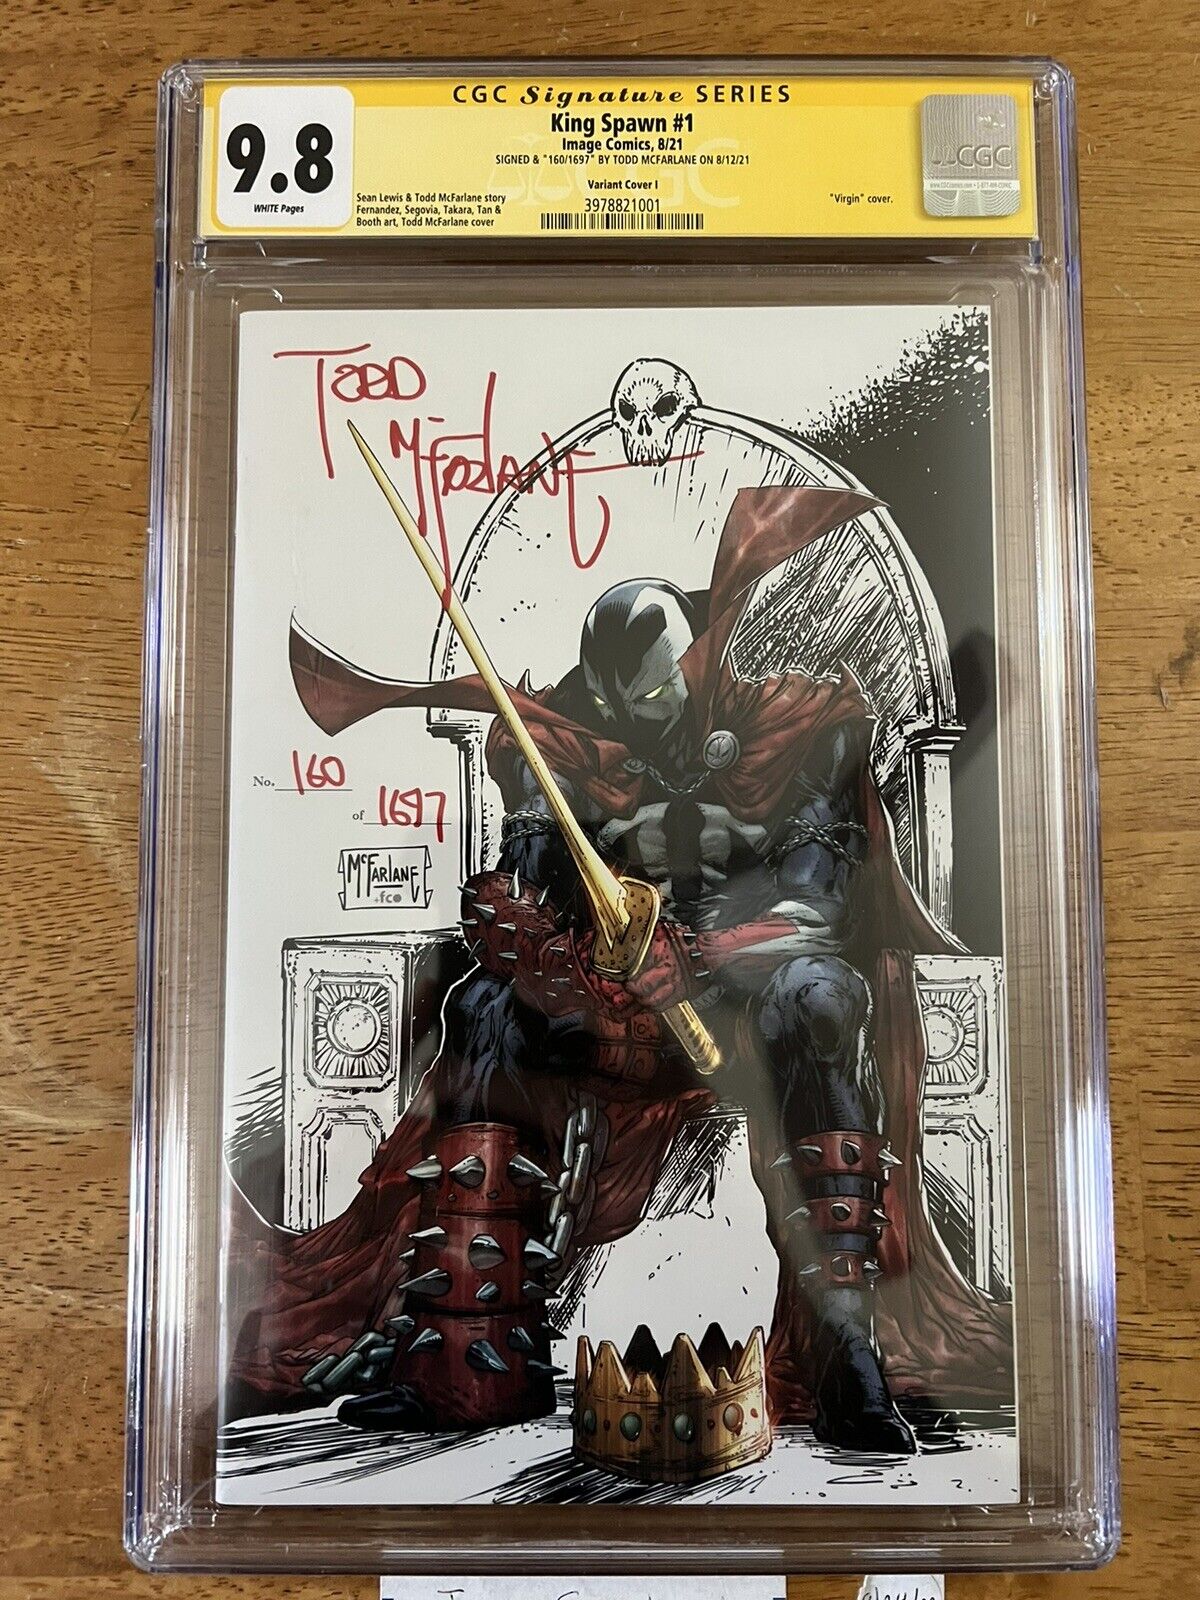 King Spawn #1 UNICORN 9.8 CGC SS LOW MINT #160/1697 Coveted Top 10%